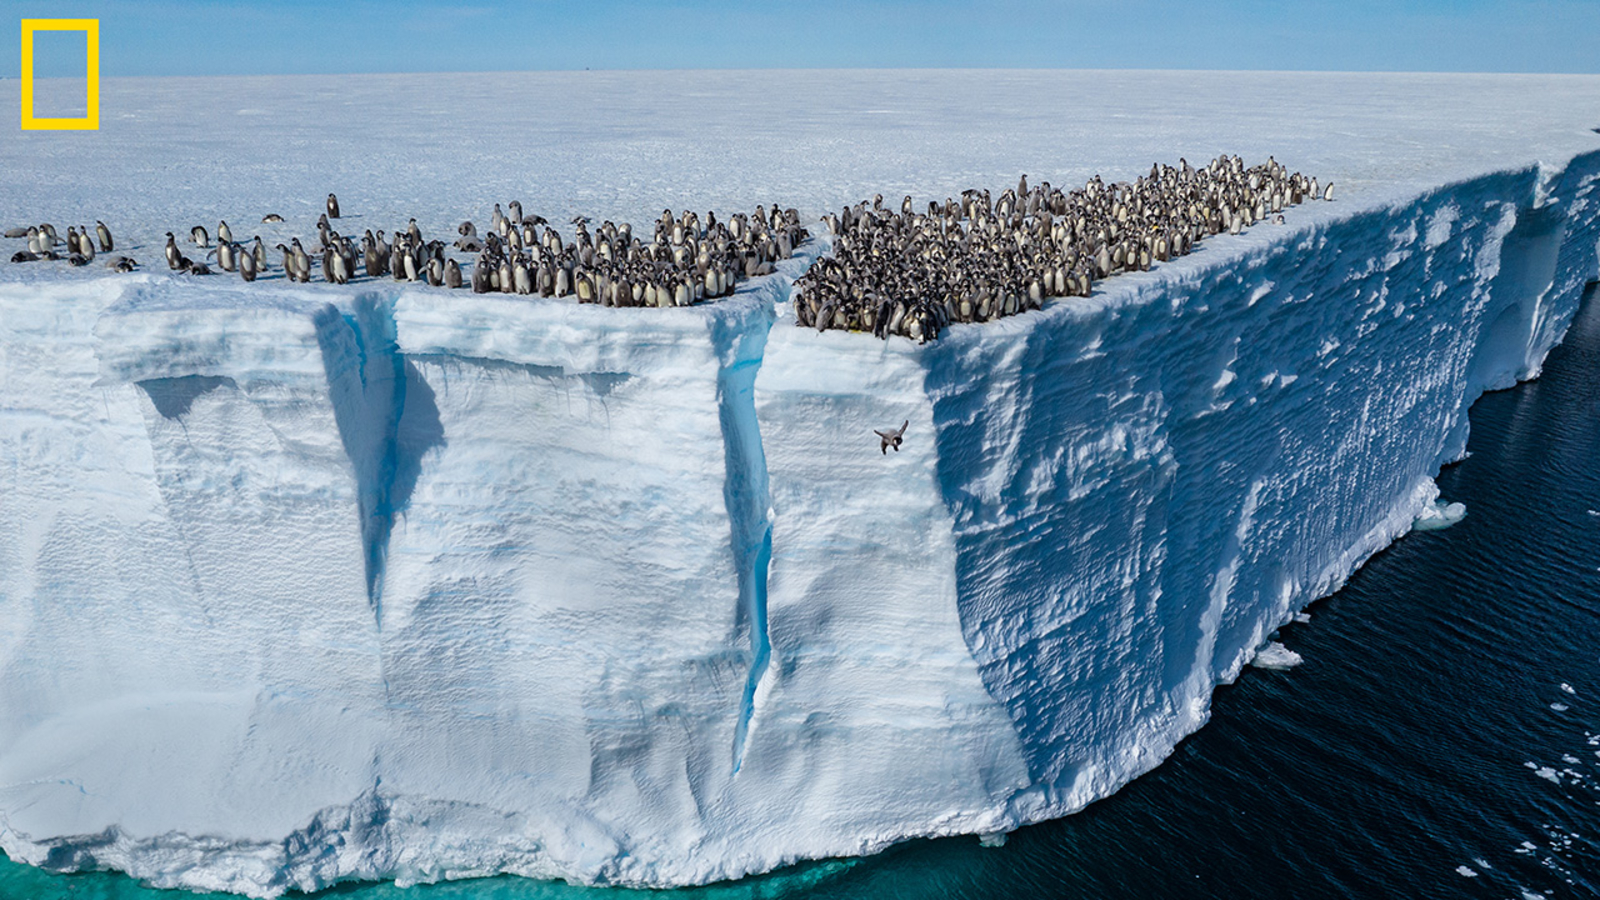 Video shows baby emperor penguins cliff diving on camera for 1st time ...